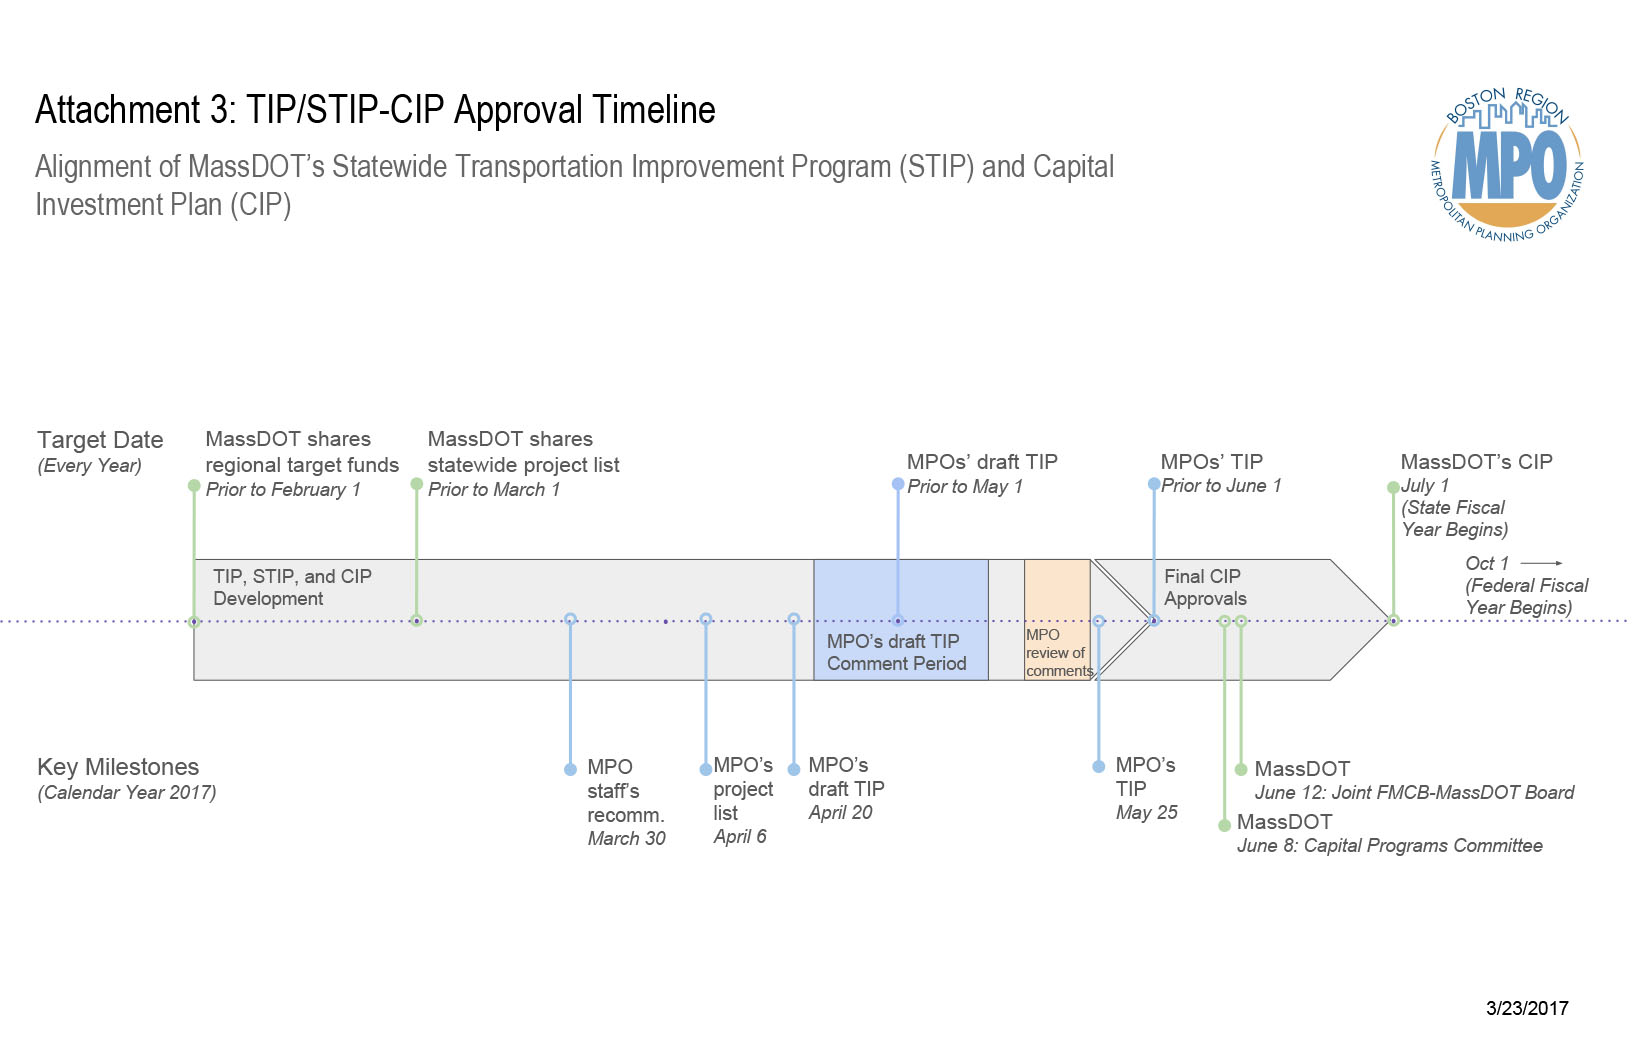 Attachment 3: TIP/STIP-CIP Approval Timeline. This is a timeline showing the alignment of MassDOT's Statewide Transportation Improvement Program (STIP) and Capital Investment Plan (CIP). Created 3/23/2017 by the MPO staff. 

Target Dates (Every Year): 
MassDOT shares regional target funds prior to February 1
MassDOT shares statewide project list prior to March 1
MPO's draft TIP voted out for public review prior to May 1
MPO's TIP endorsed prior to June 1
MassDOT's CIP endorsed by July 1 (when the State Fiscal Year begins)
Federal Fiscal Year begins October 1

Key Milestones (Calendar Year 2017): 
MPO's staff recommendation discussed March 30
MPO's project list selected April 6
MPO's draft TIP voted out for public review April 20
MPO's TIP endorsed on May 25
MassDOT's Capital Programs Committee meets June 8
MassDOT's Joint FMCB-MassDOT Board meets June 12
	